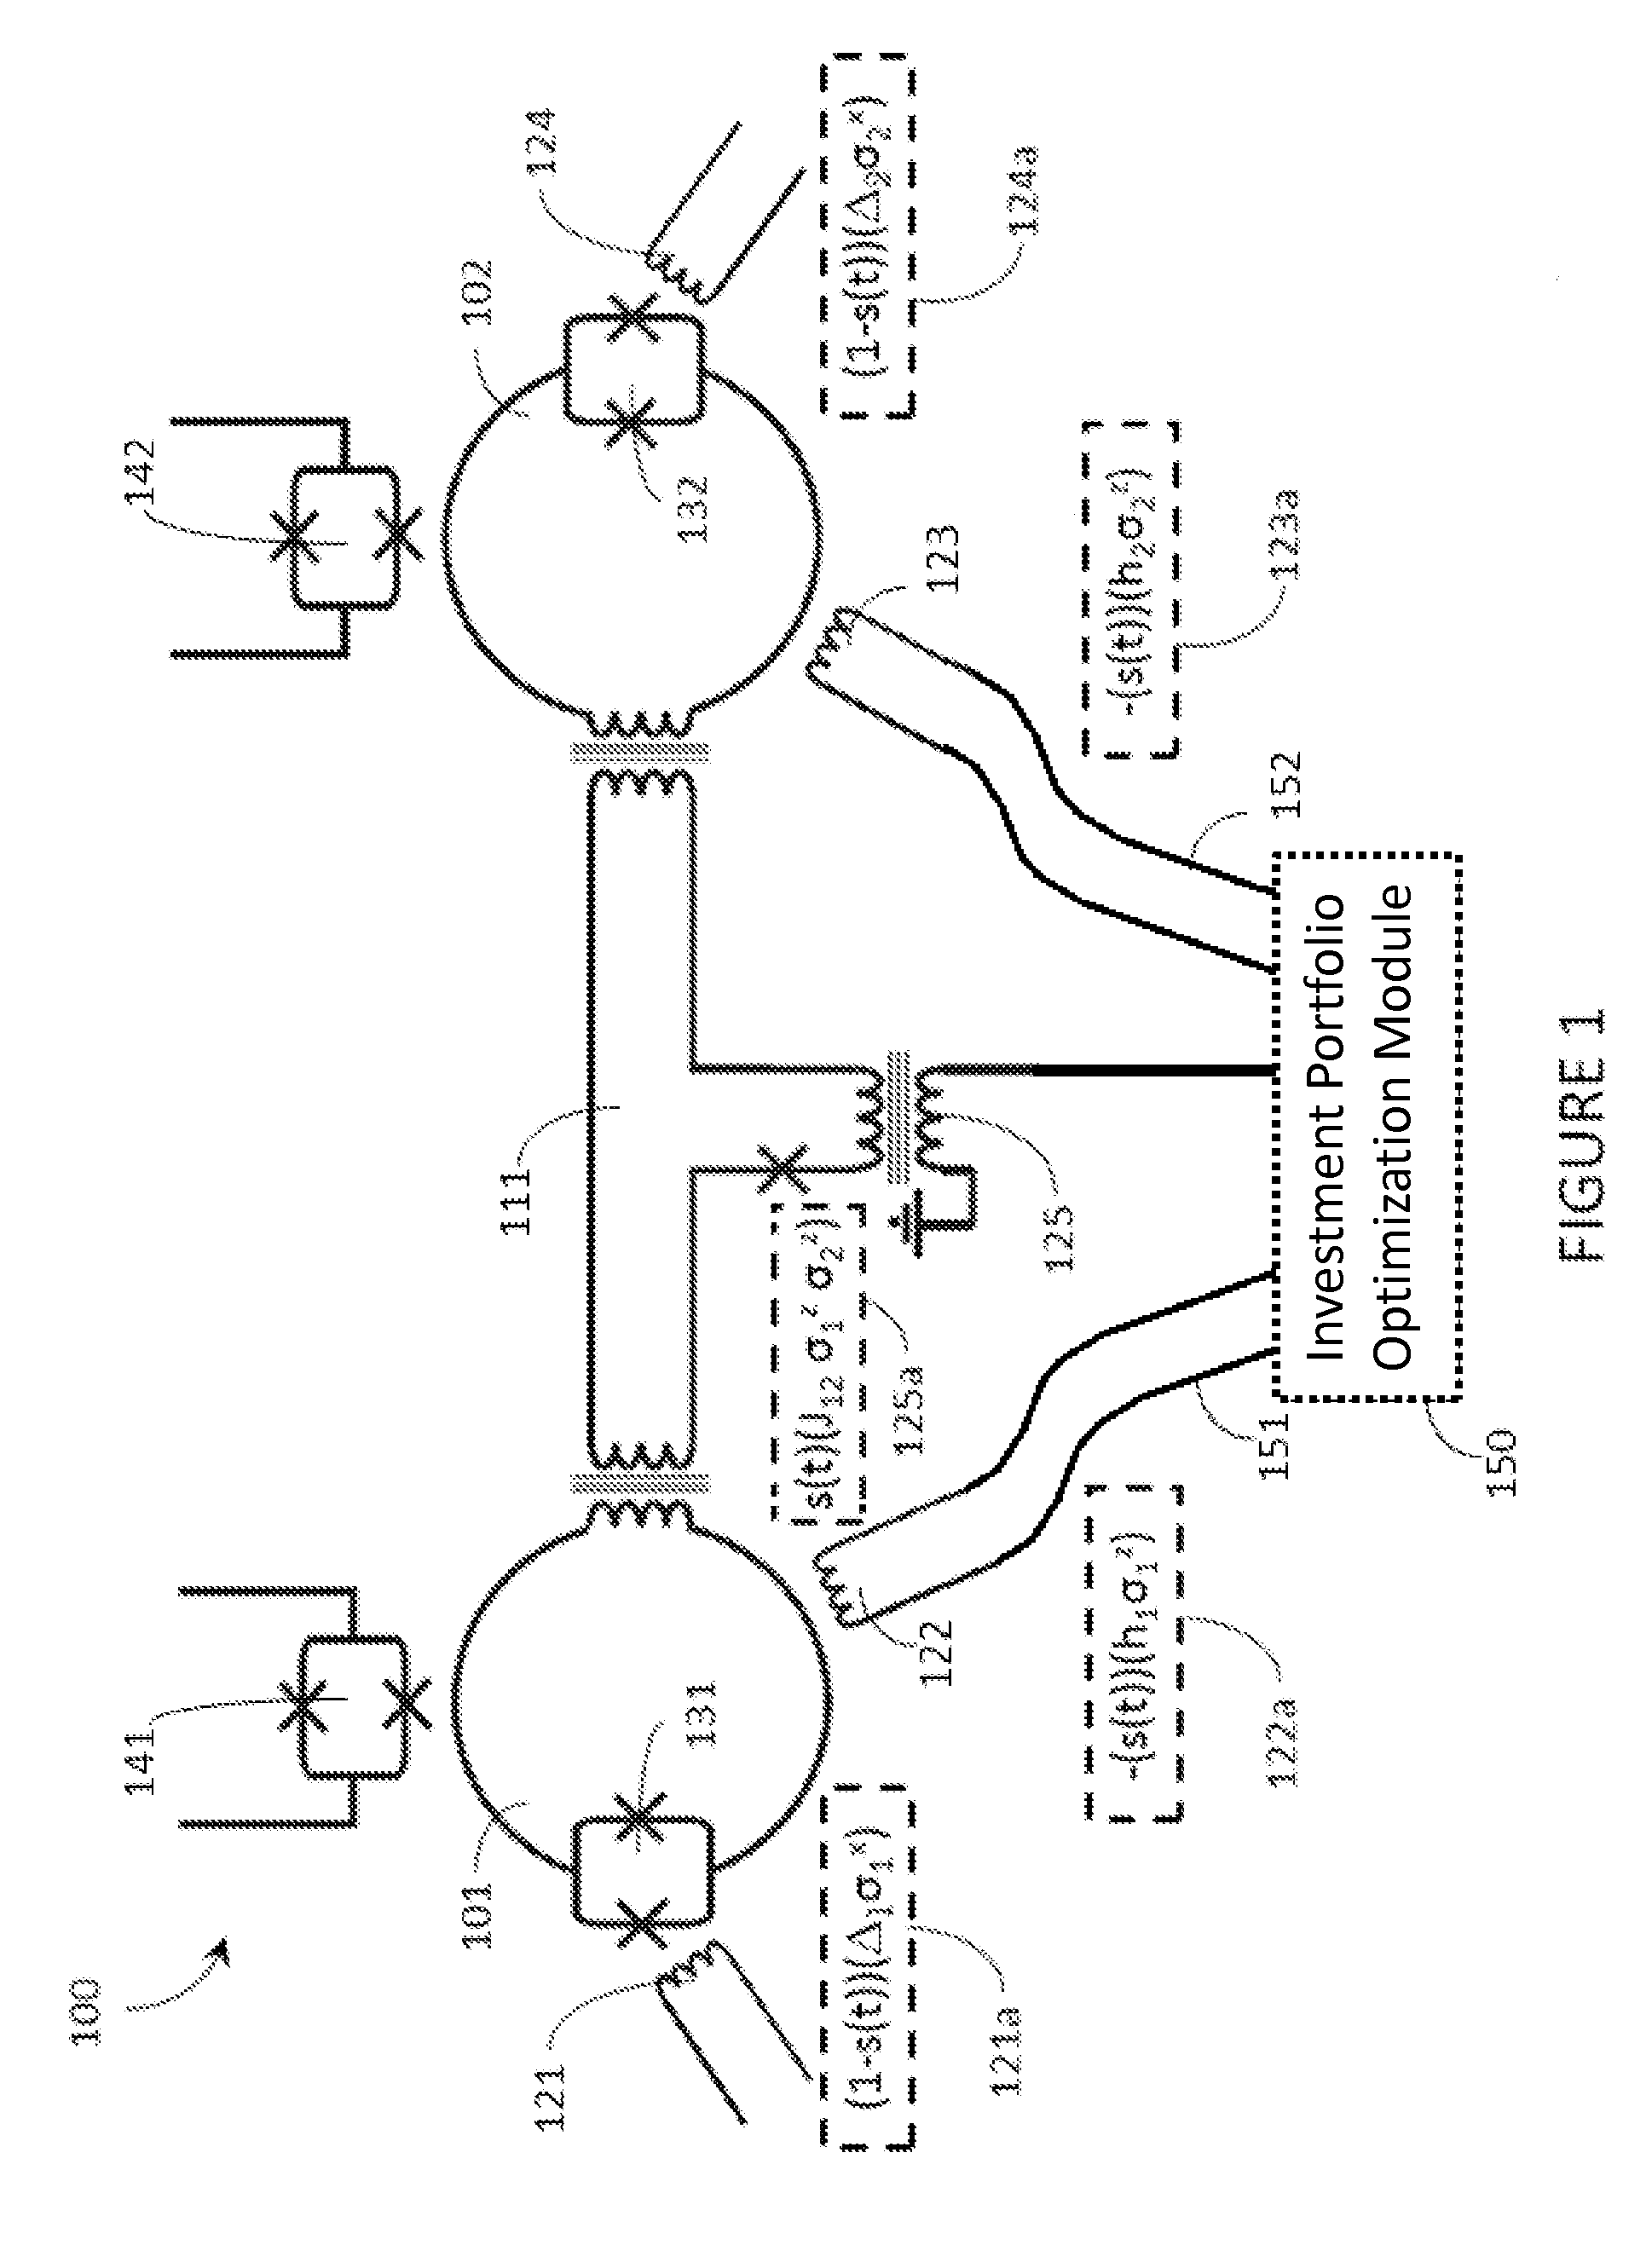 Systems and methods for optimization of investment portfolios